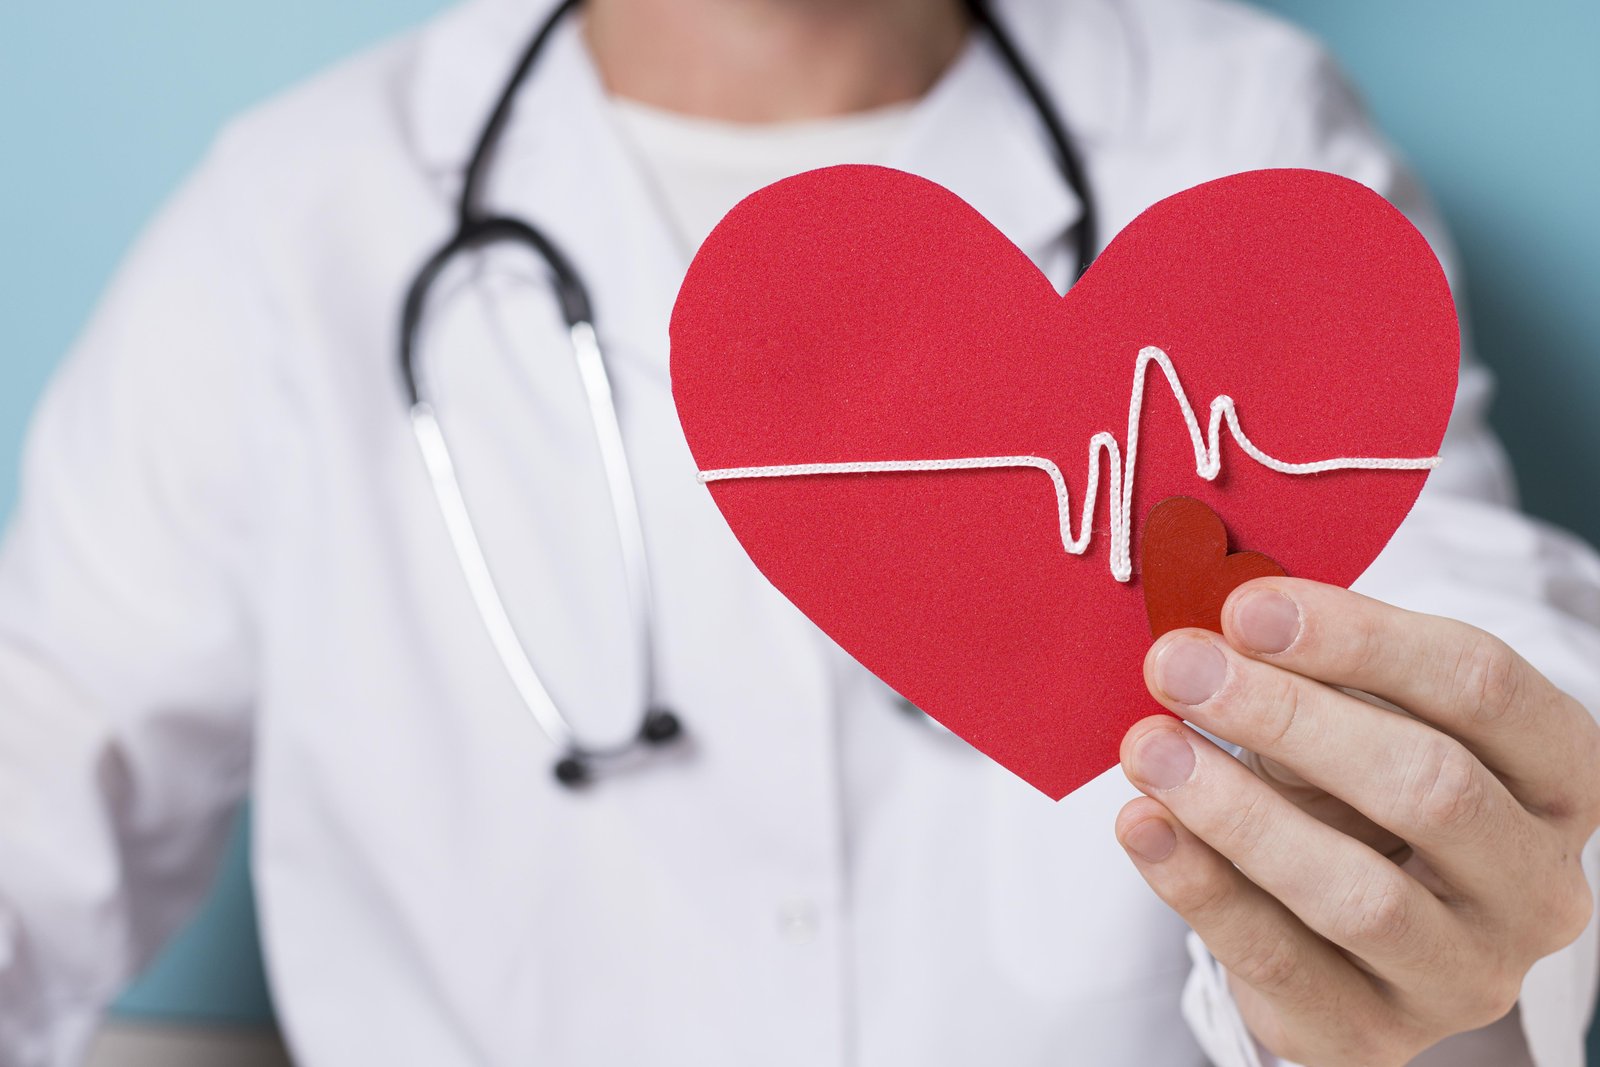 More Than Half Of Americans Will Develop Cardiovascular Disease In 30 Years: Report